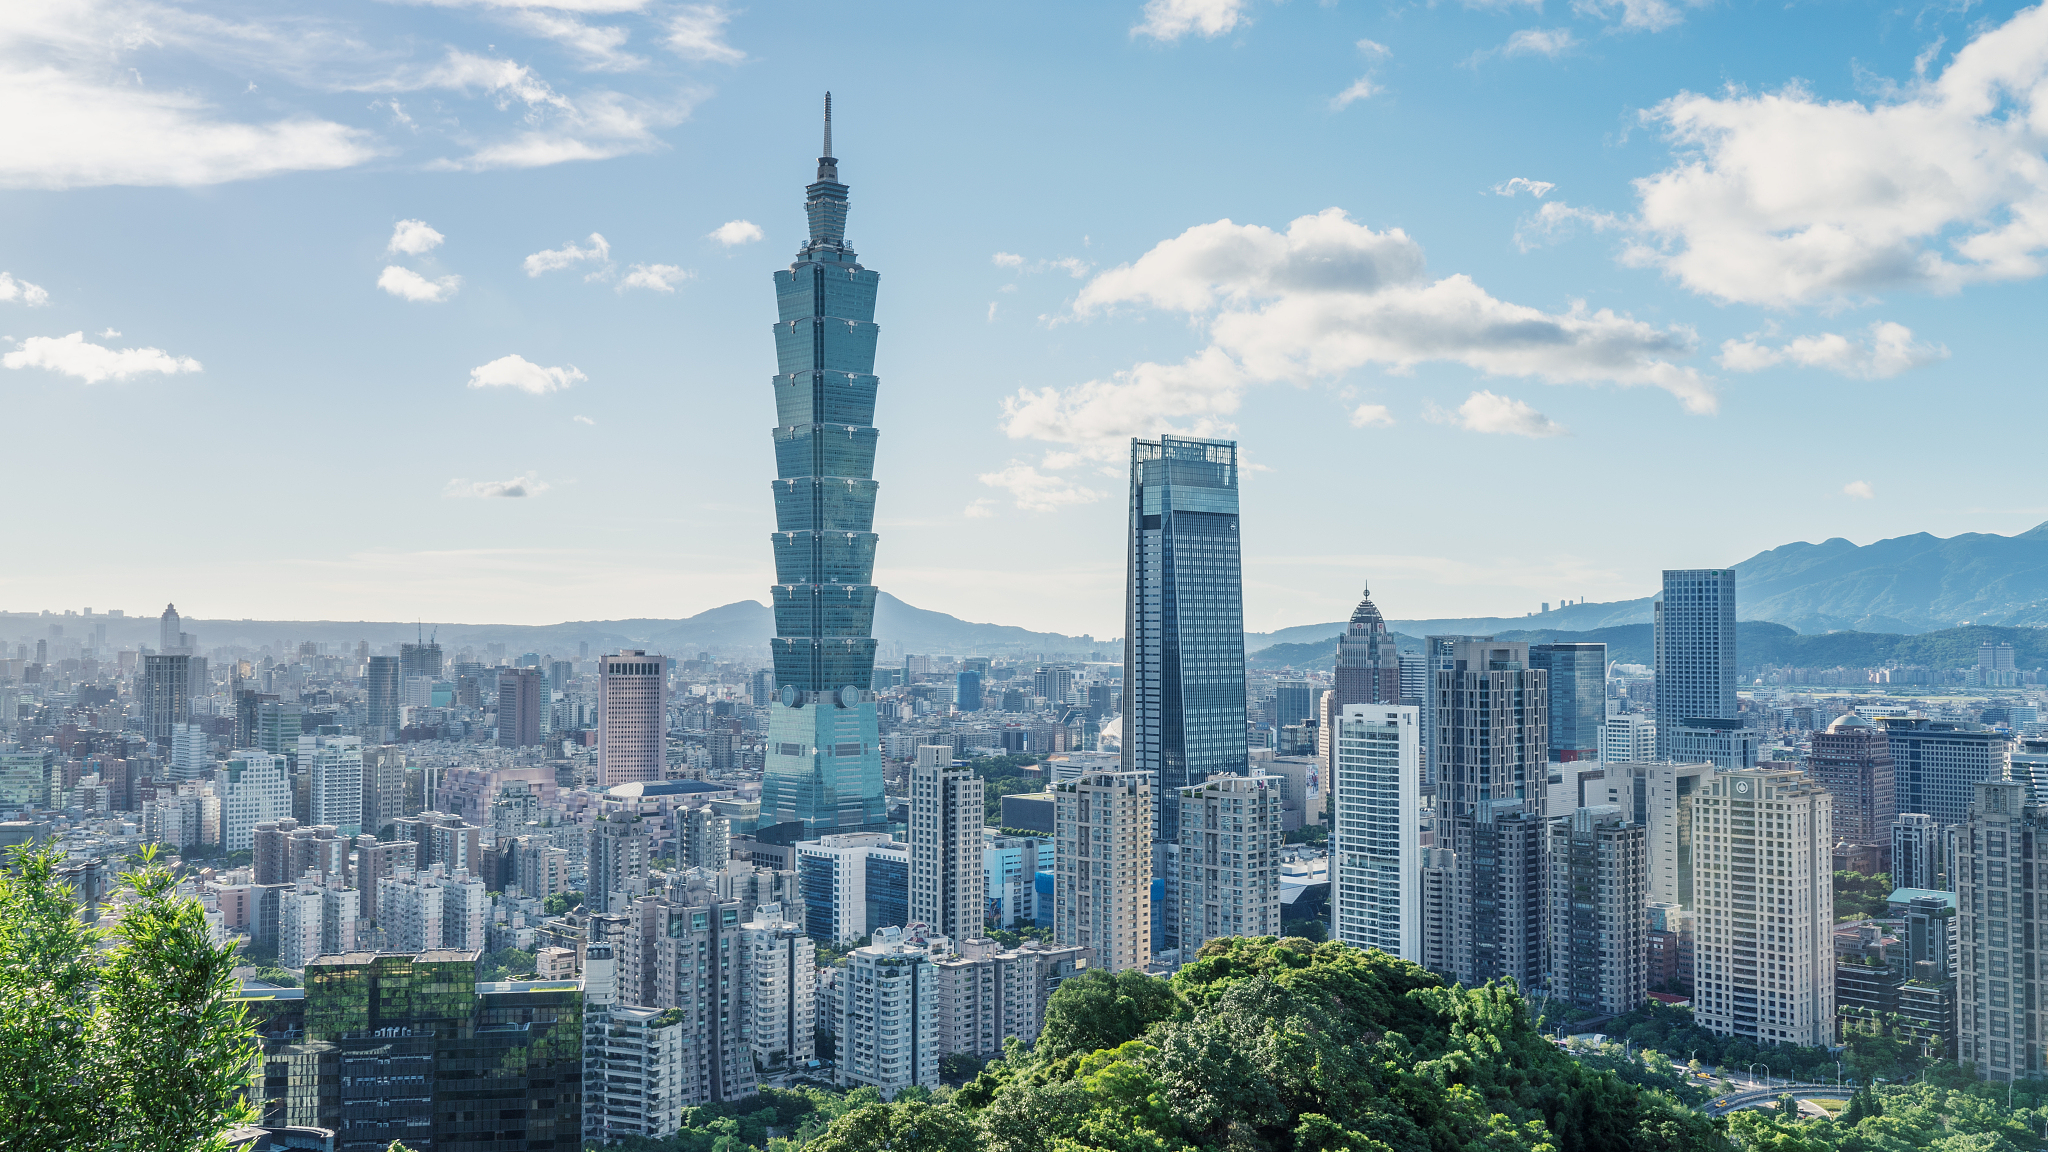 A view of the Taipei 101 skyscraper in southeast China's Taiwan region. /CFP